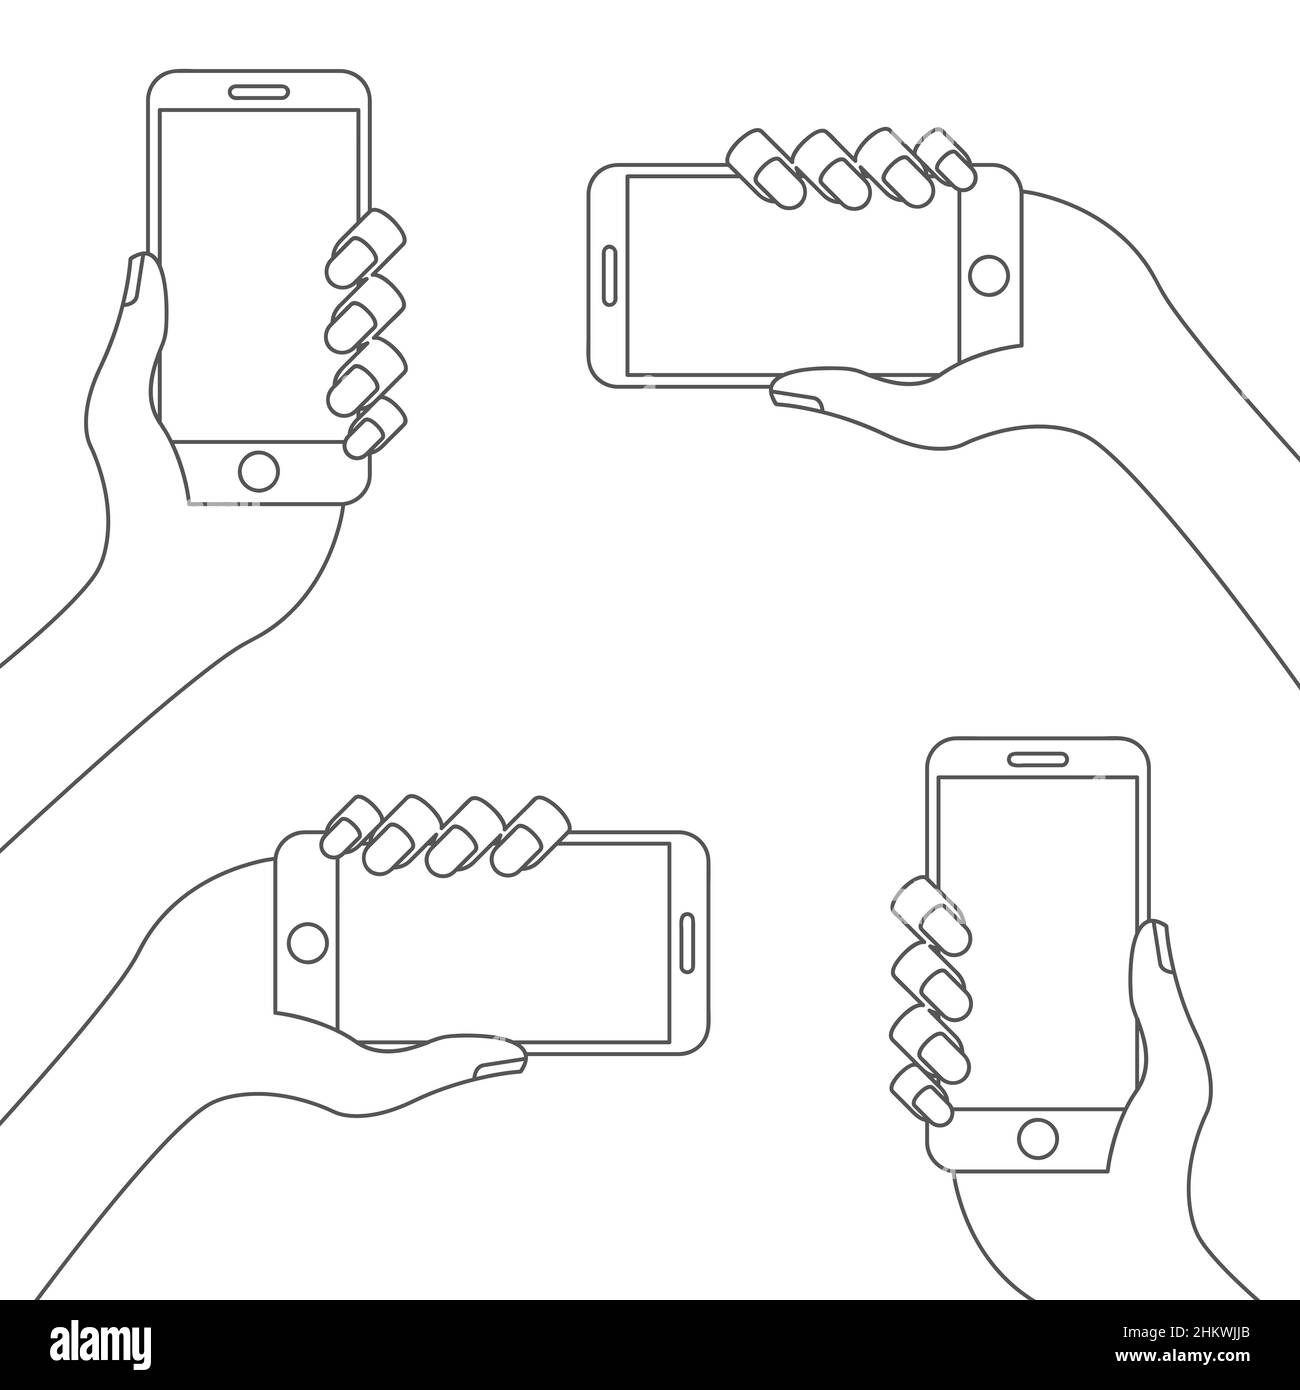 Female hand holding a smartphone with blank screen. Line icon set. Flat illustration isolated on white background. Stock Photo